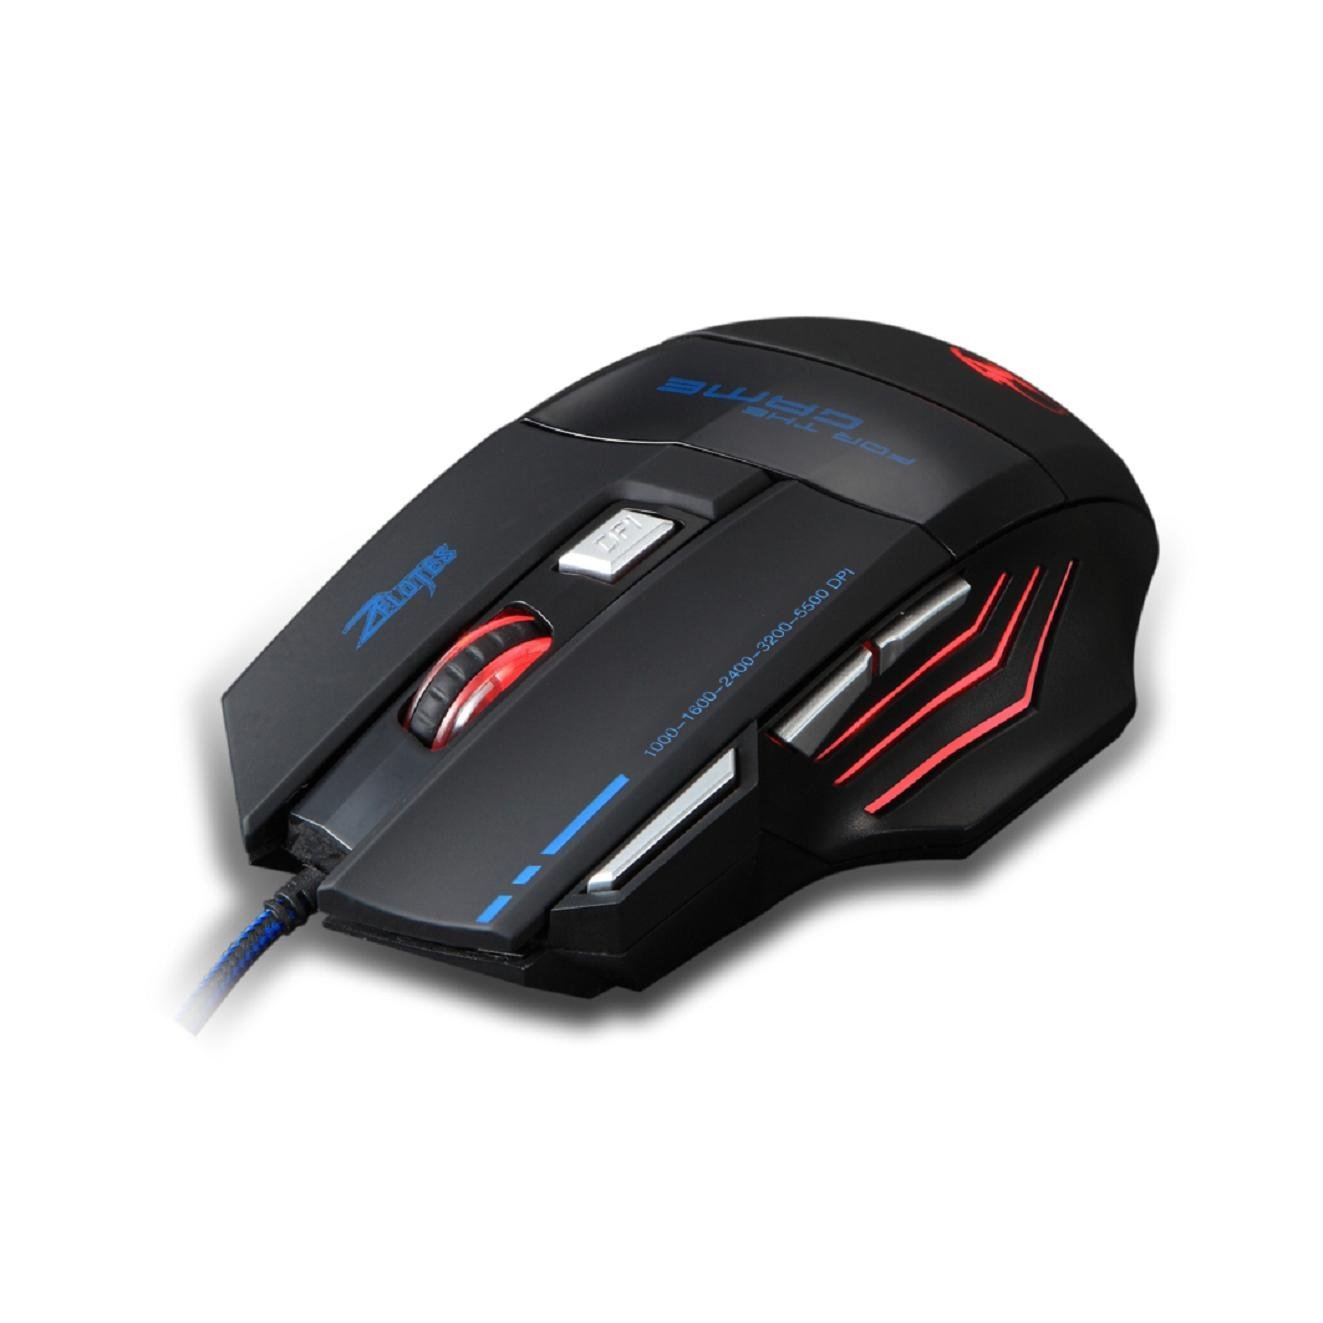 5500 DPI 7 Buttons LED Optical USB Wired Gaming Mouse Mice For Pro Gamer 